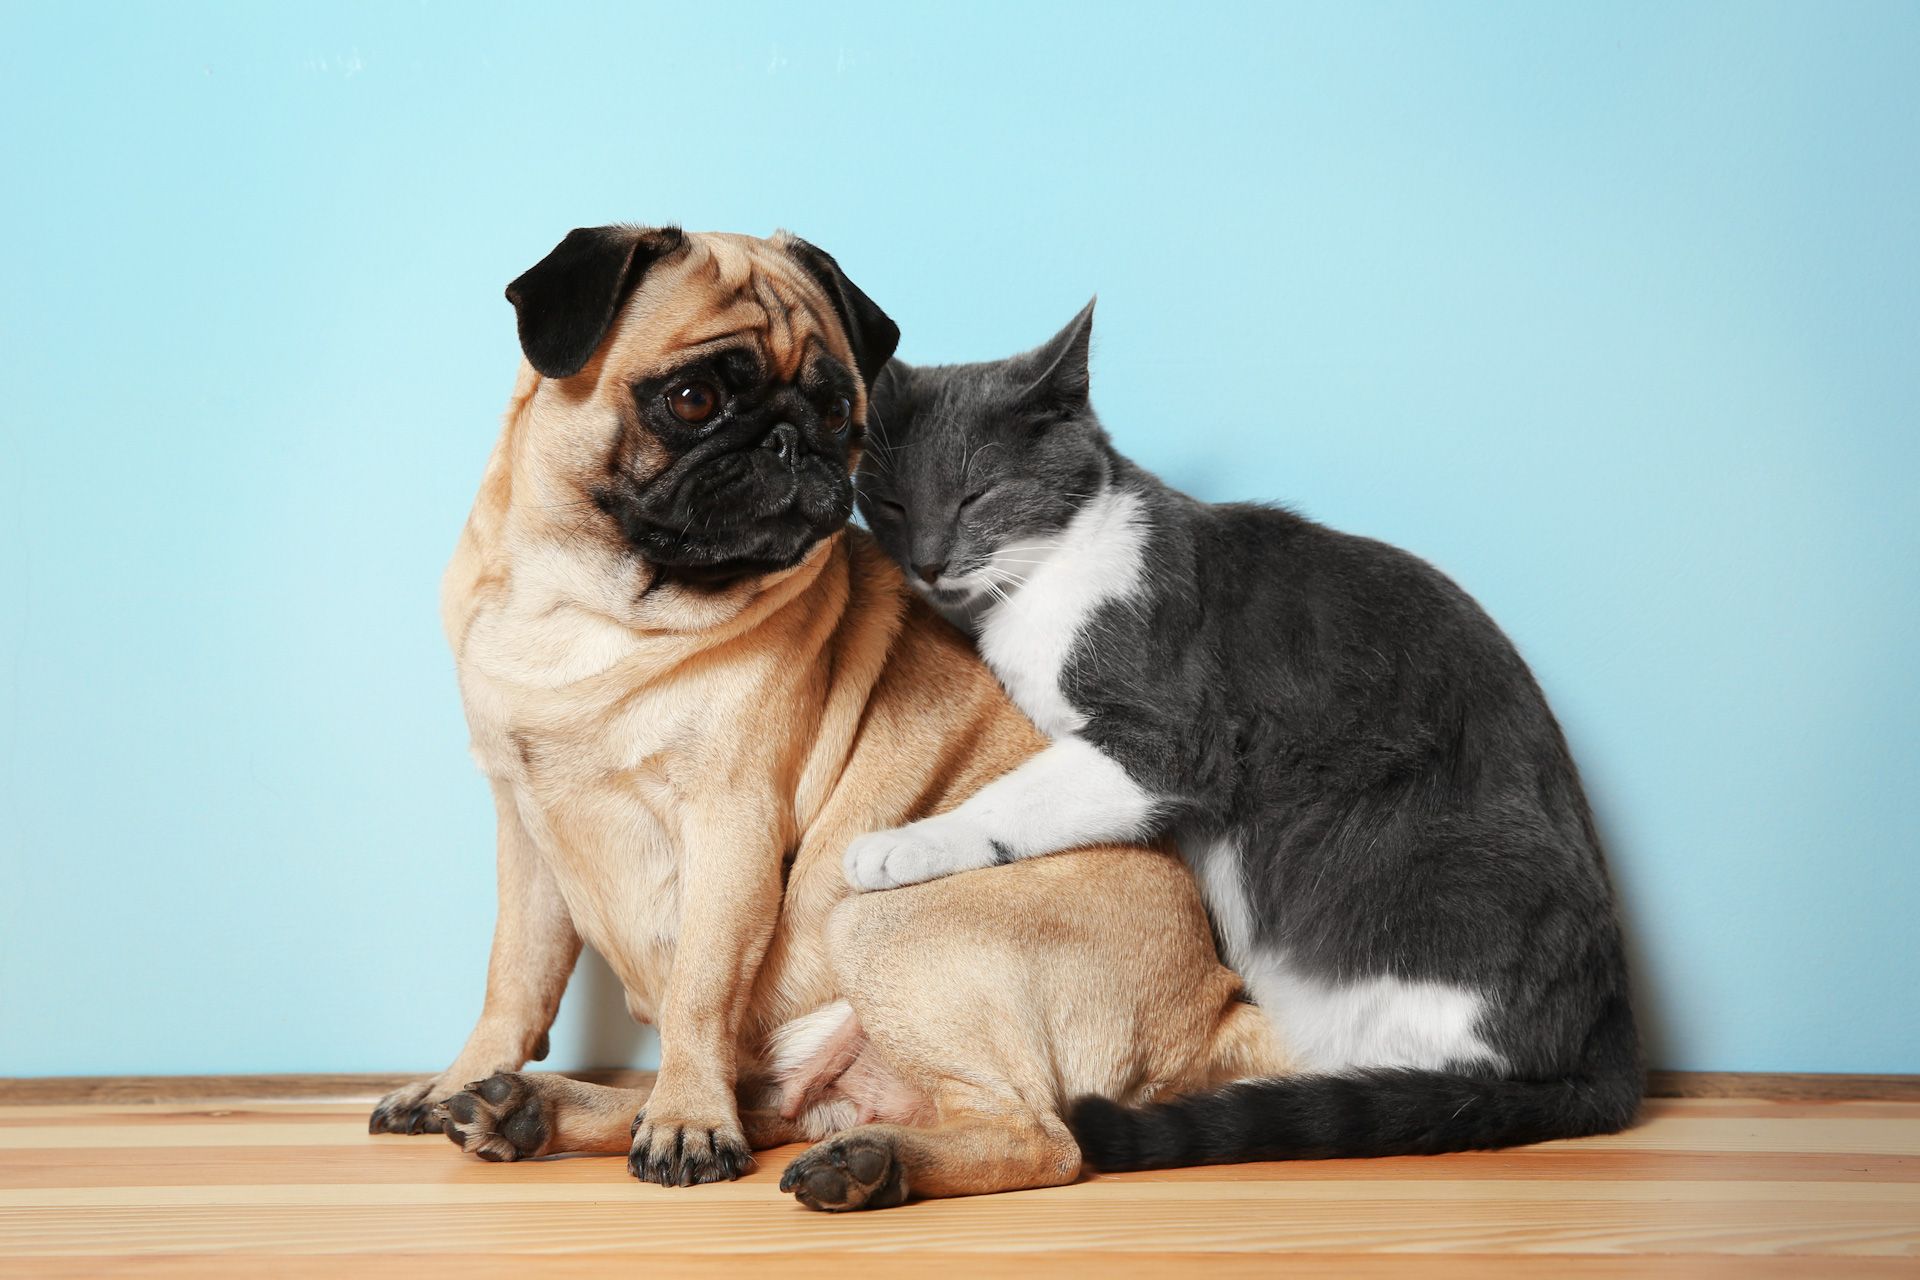 A pug dog and a cat are sitting next to each other on a wooden floor 